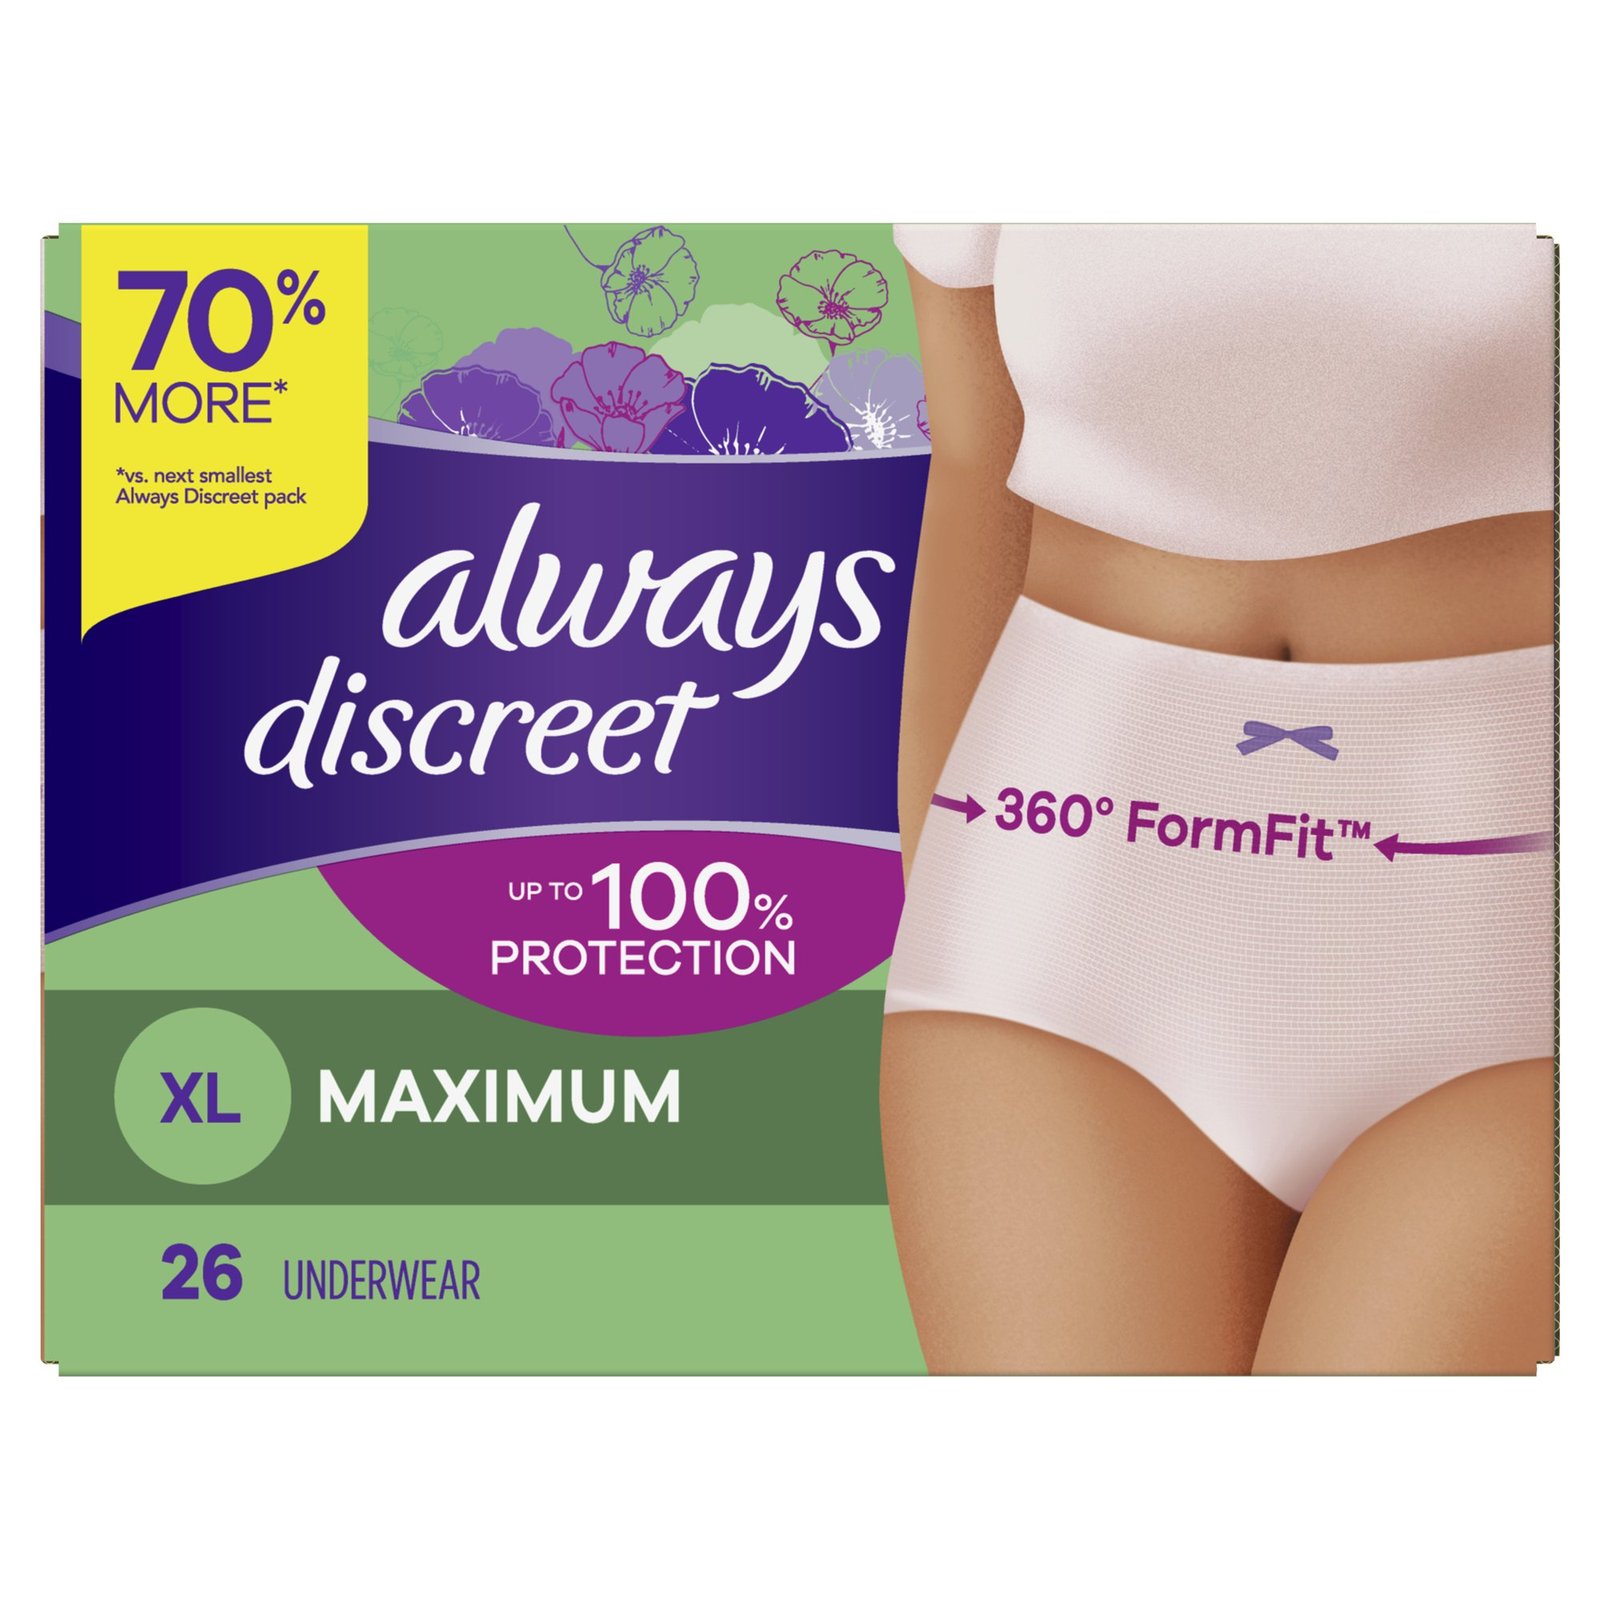 https://themarketdepot.com/wp-content/uploads/2023/01/Always-Discreet-Adult-Incontinence-Underwear-Max-Protection-XL-26-Ct-4.jpeg